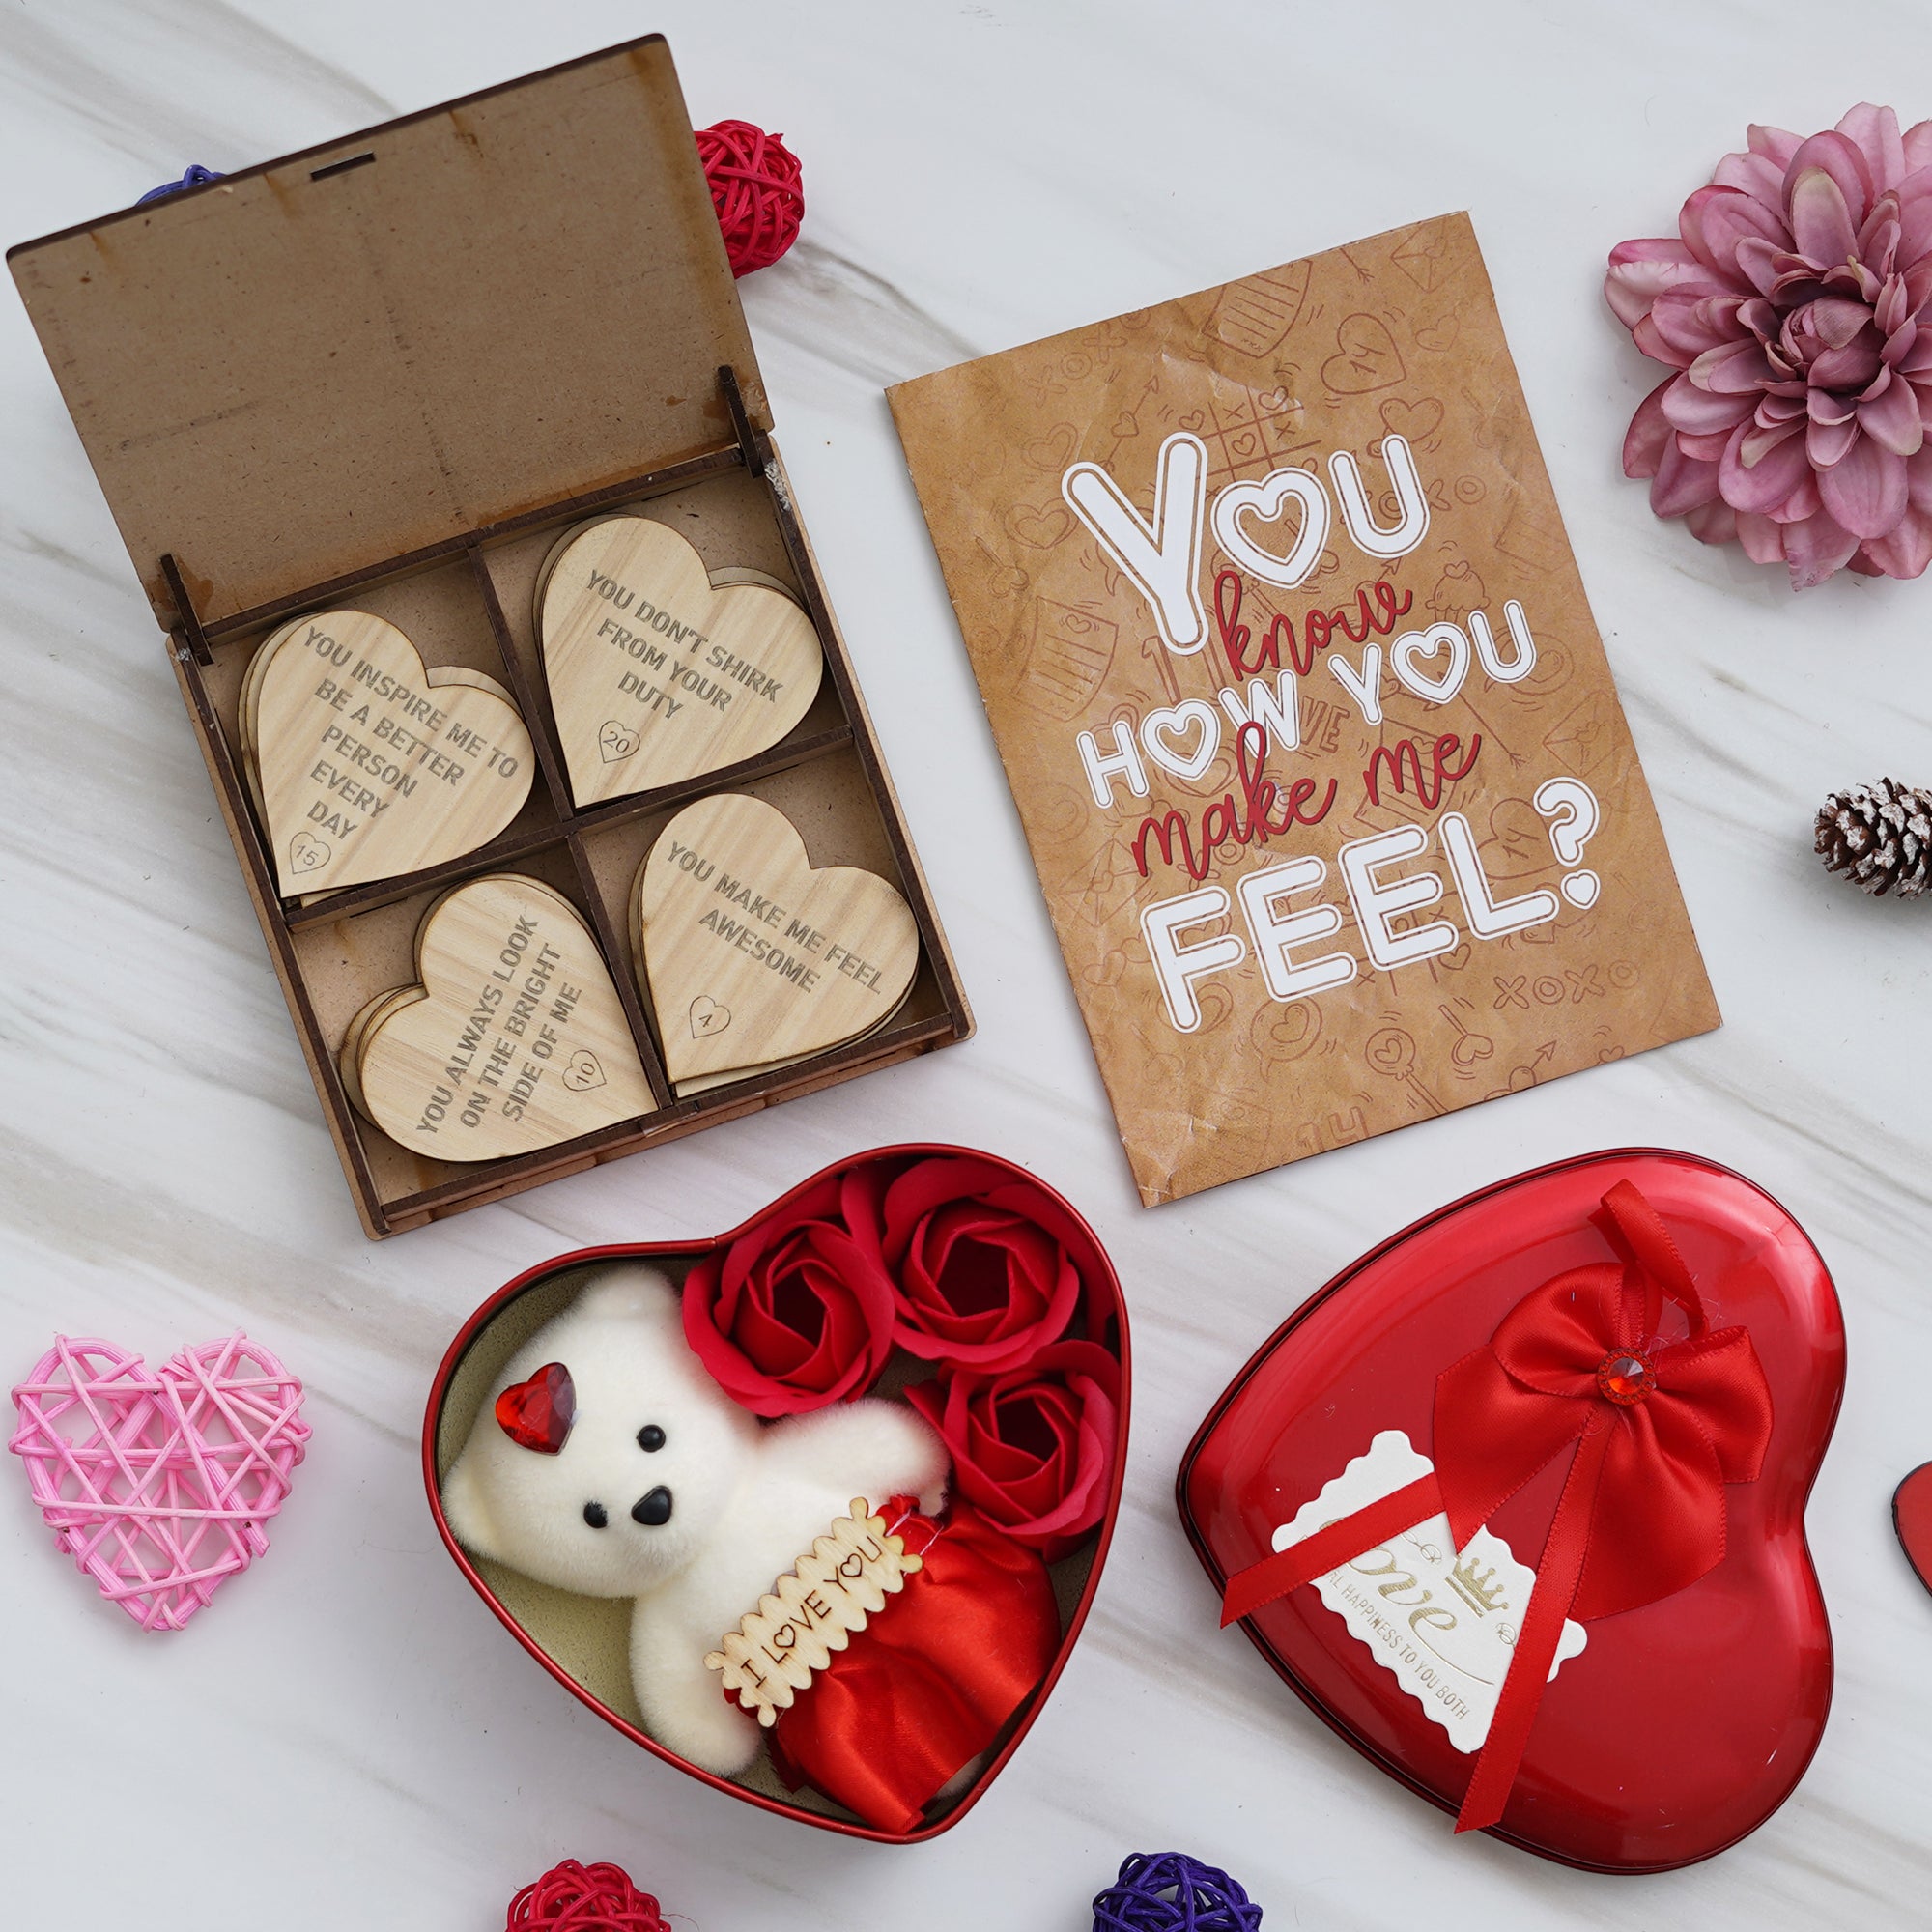 Valentine Combo of Card, Heart Shaped Gift Box Set with White Teddy and Red Roses, "20 Reasons Why I Need You" Printed on Little Hearts Wooden Gift Set